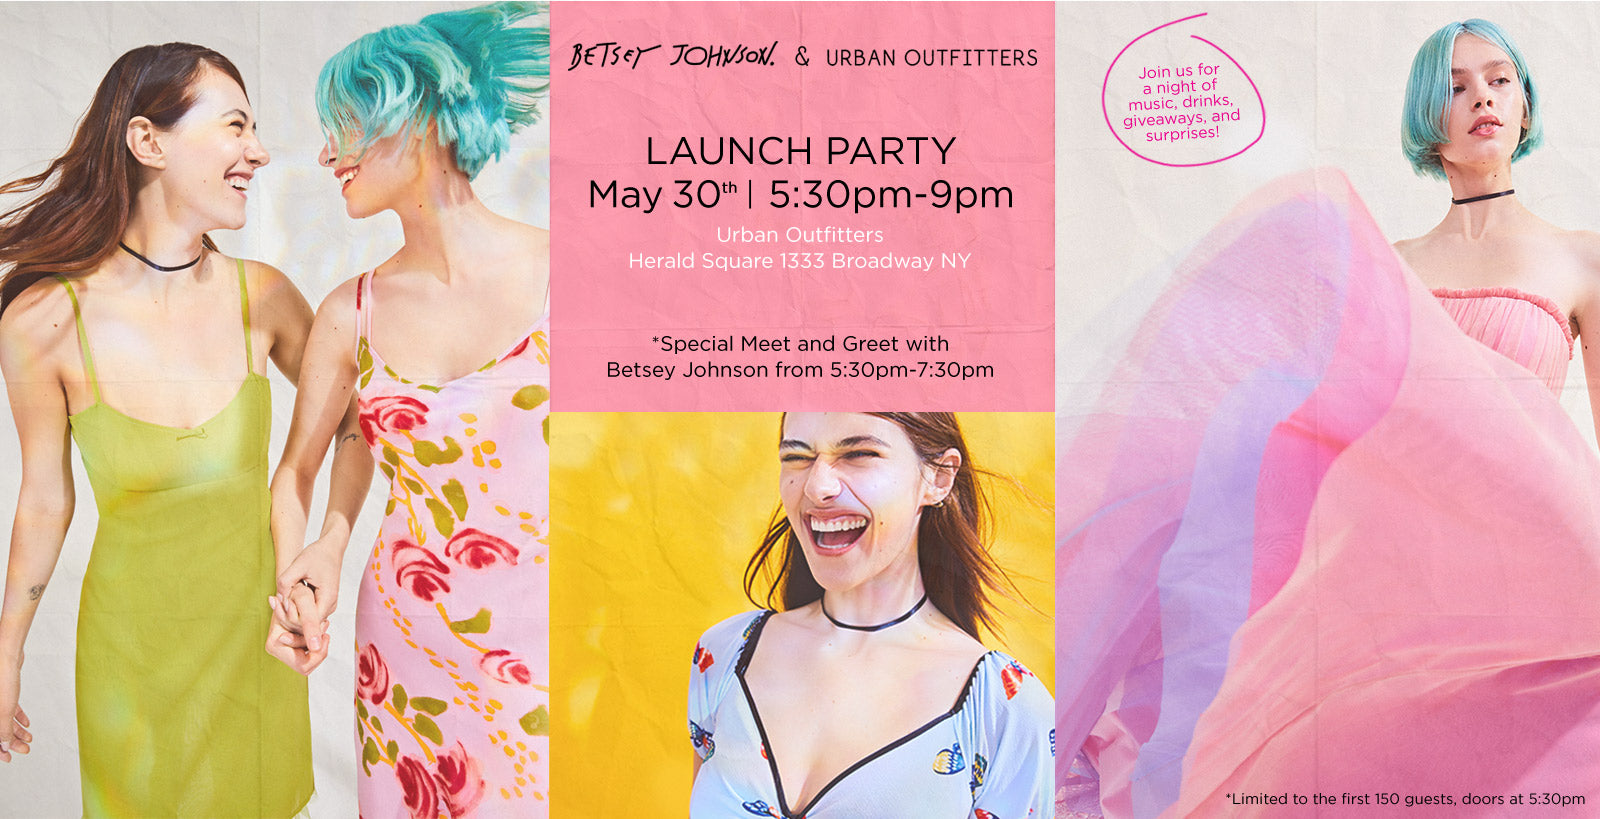 Betsey Johnson & Urban Outfitters Launch Party